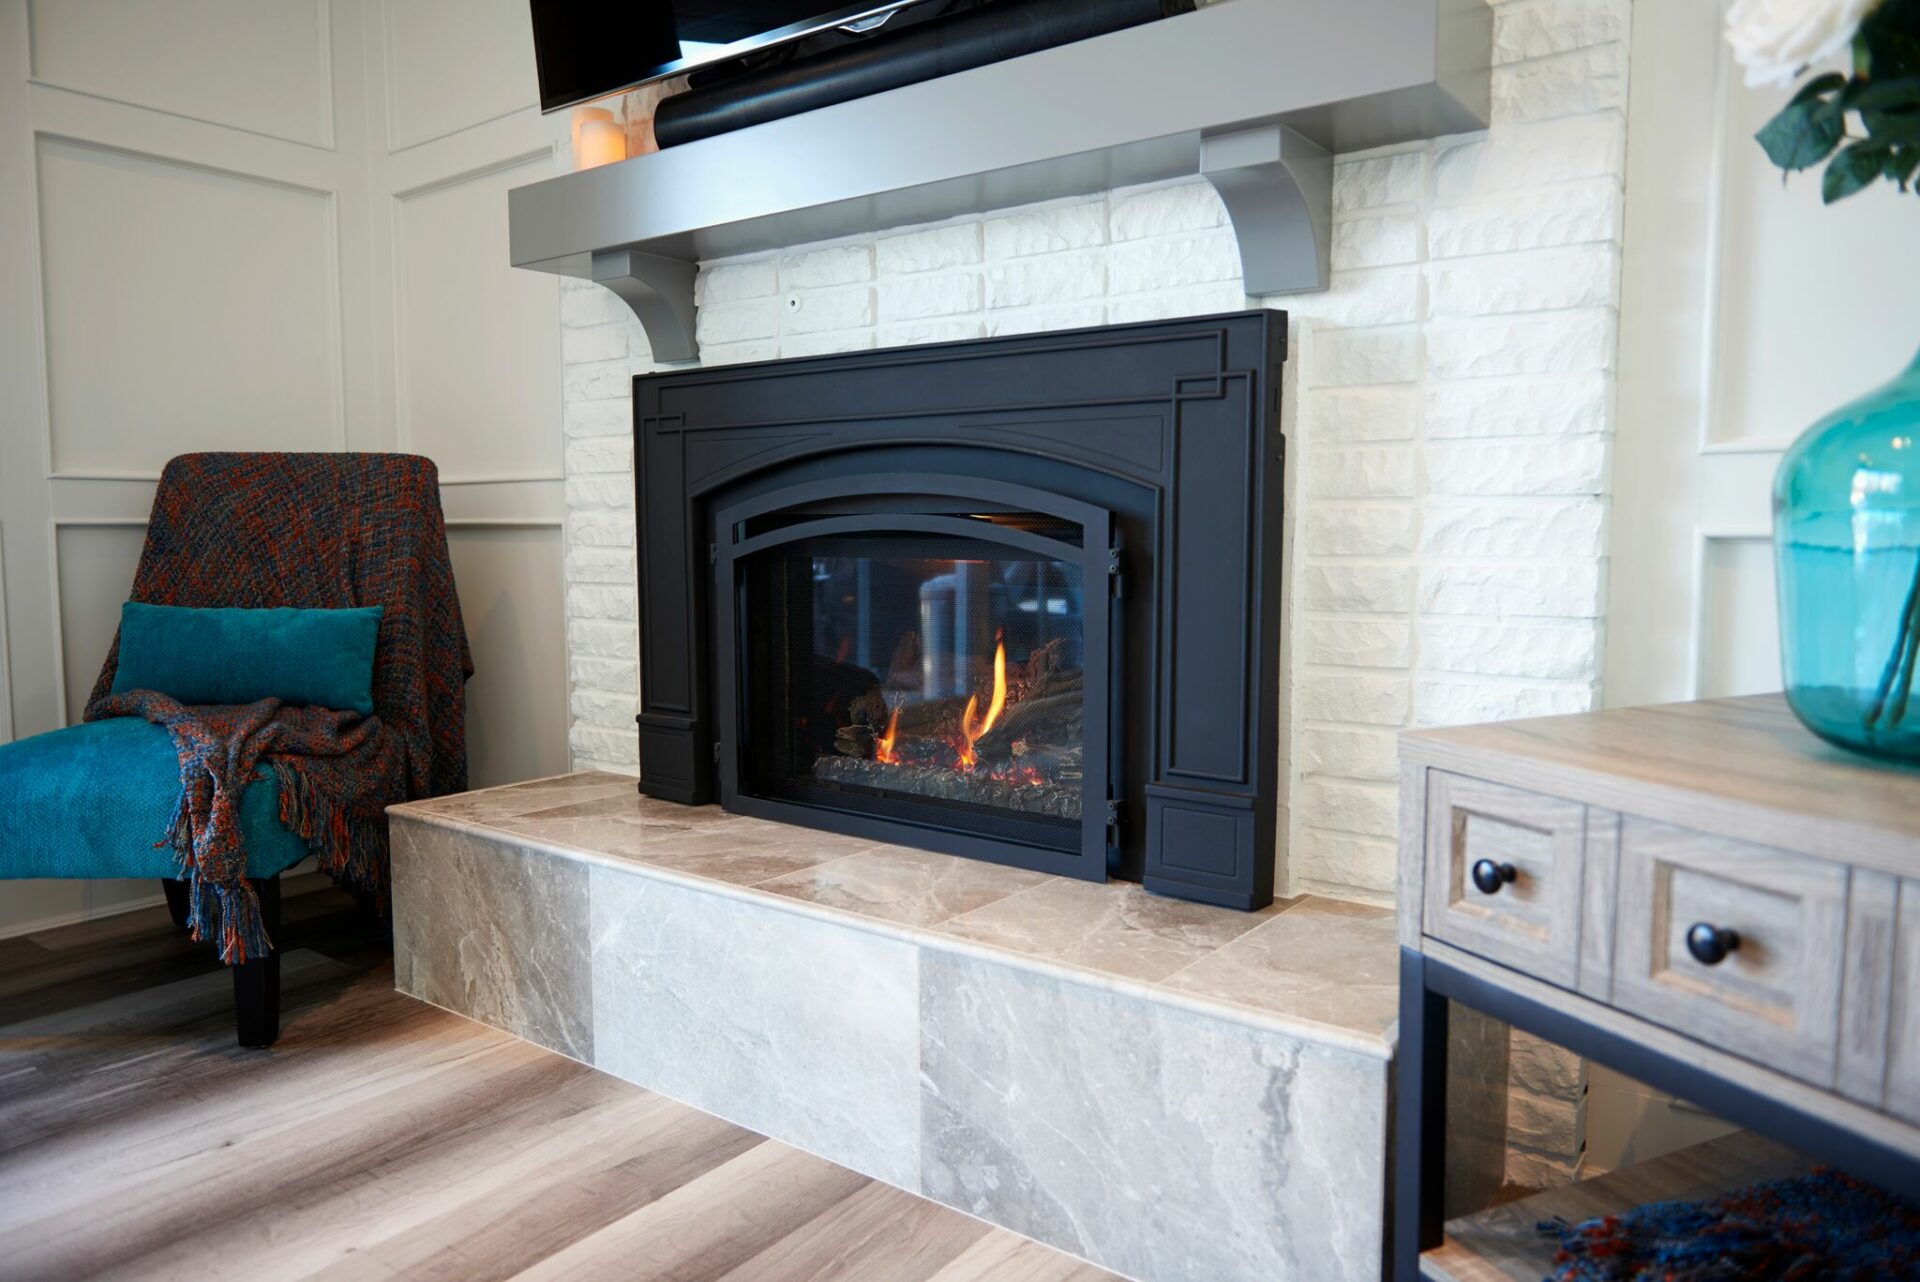 A fireplace with a fire place in the center of it.